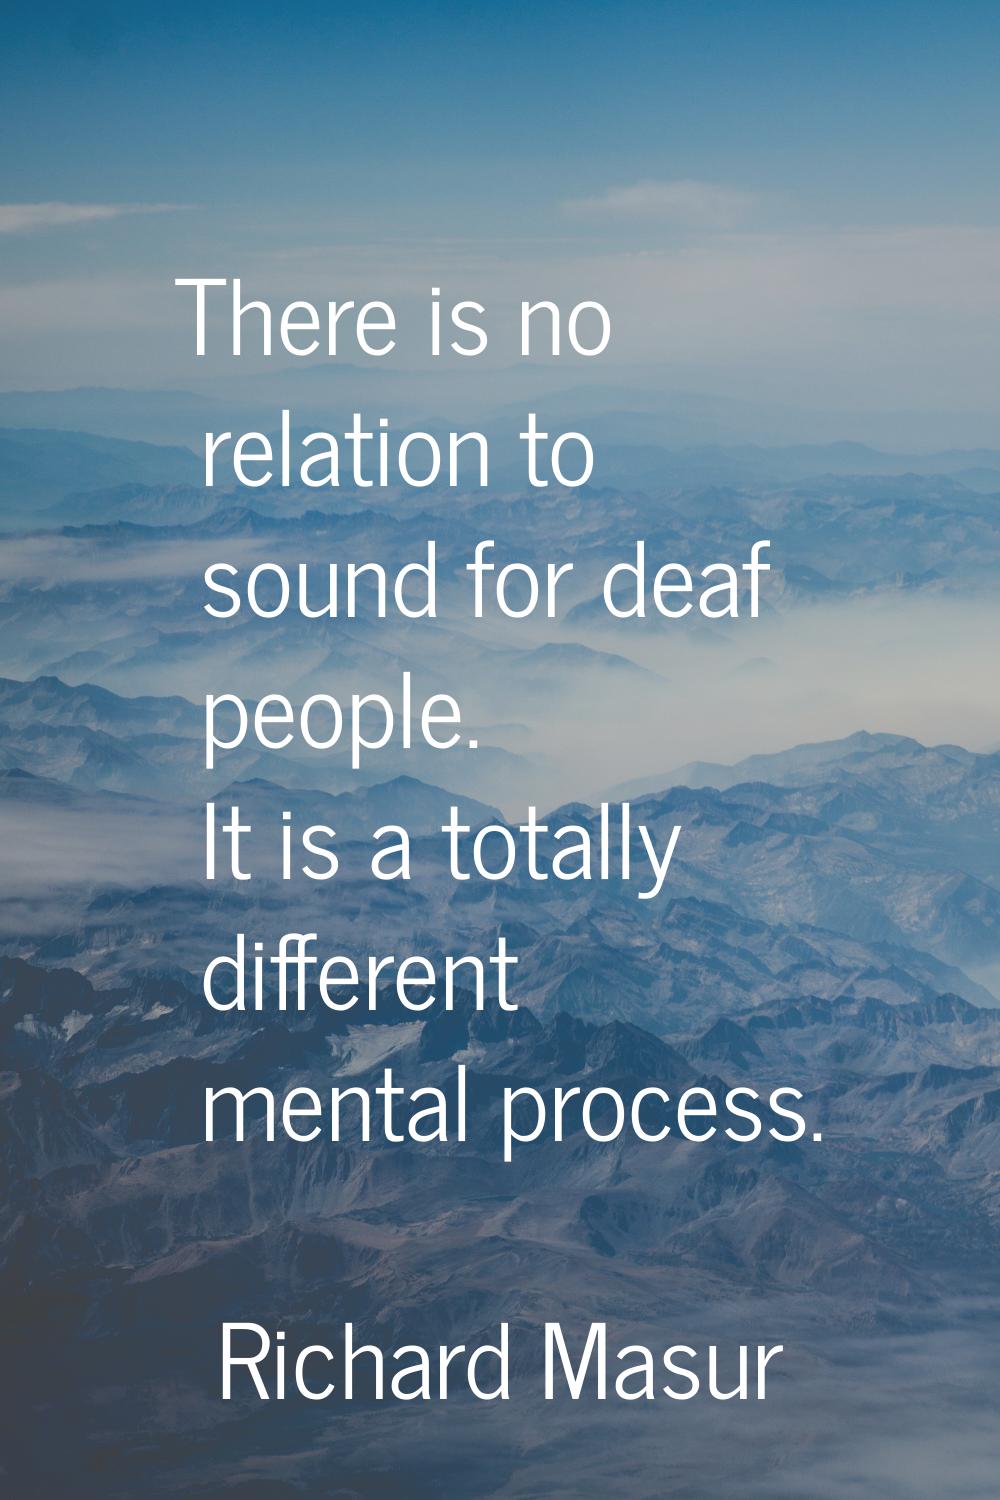 There is no relation to sound for deaf people. It is a totally different mental process.